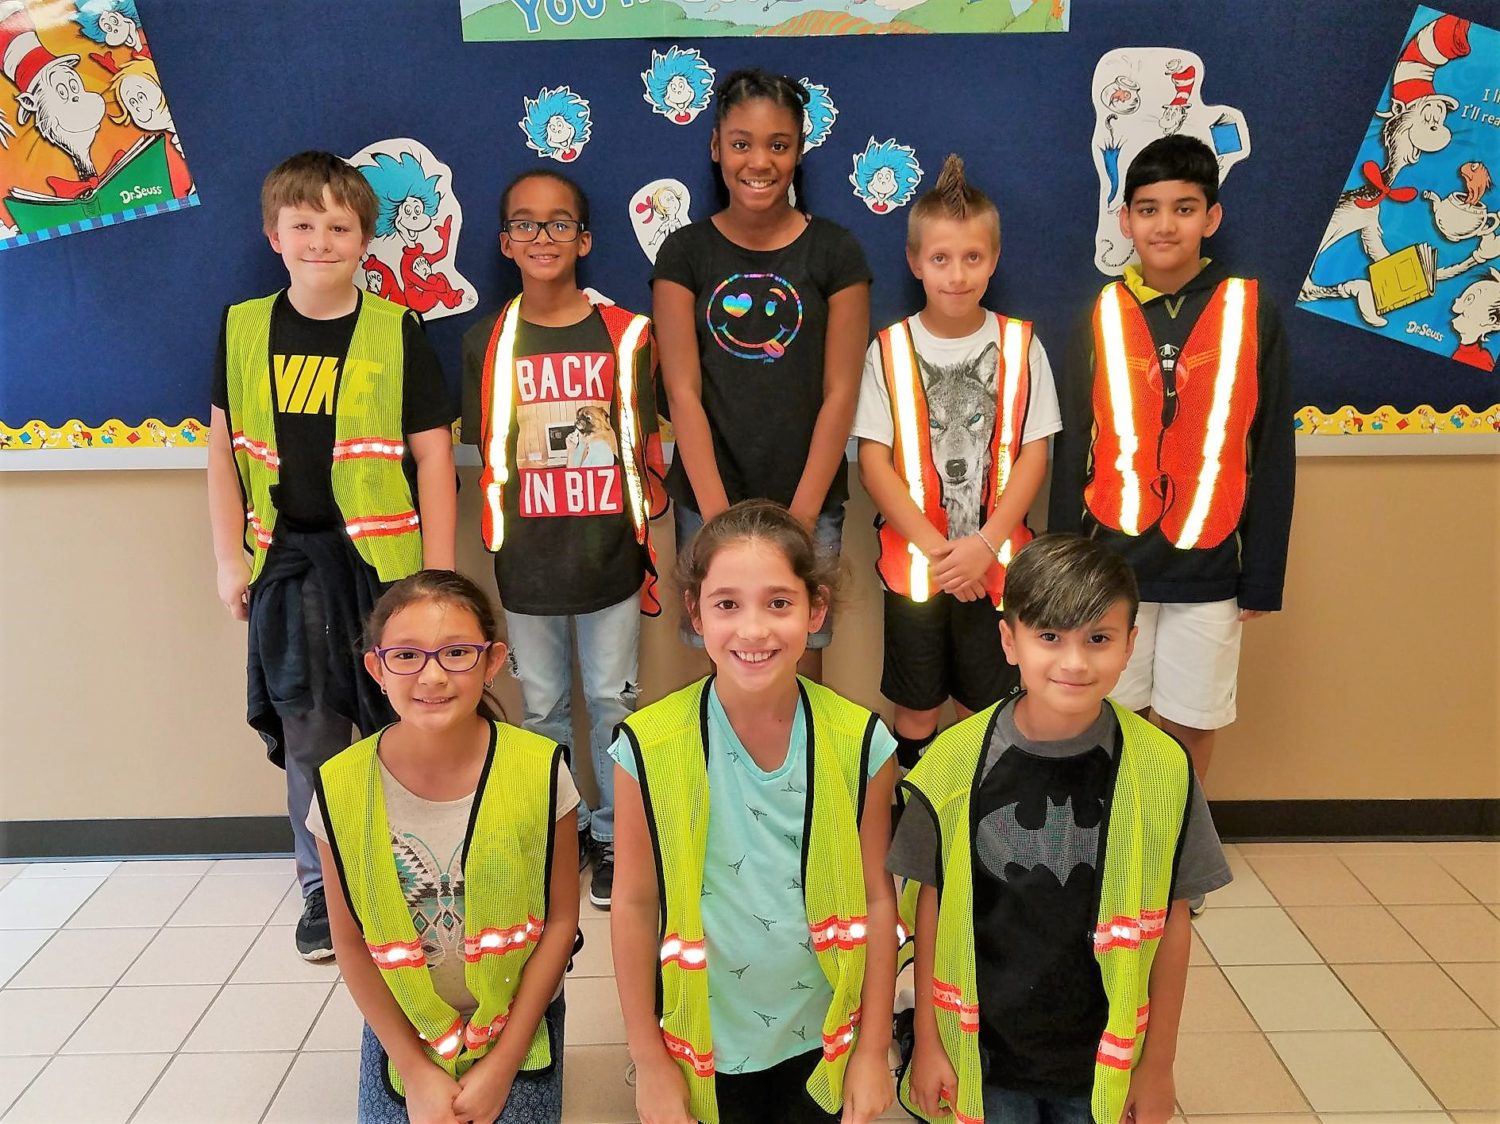 a safety patrol group of students wearing their safety yellow vests pose for a picture